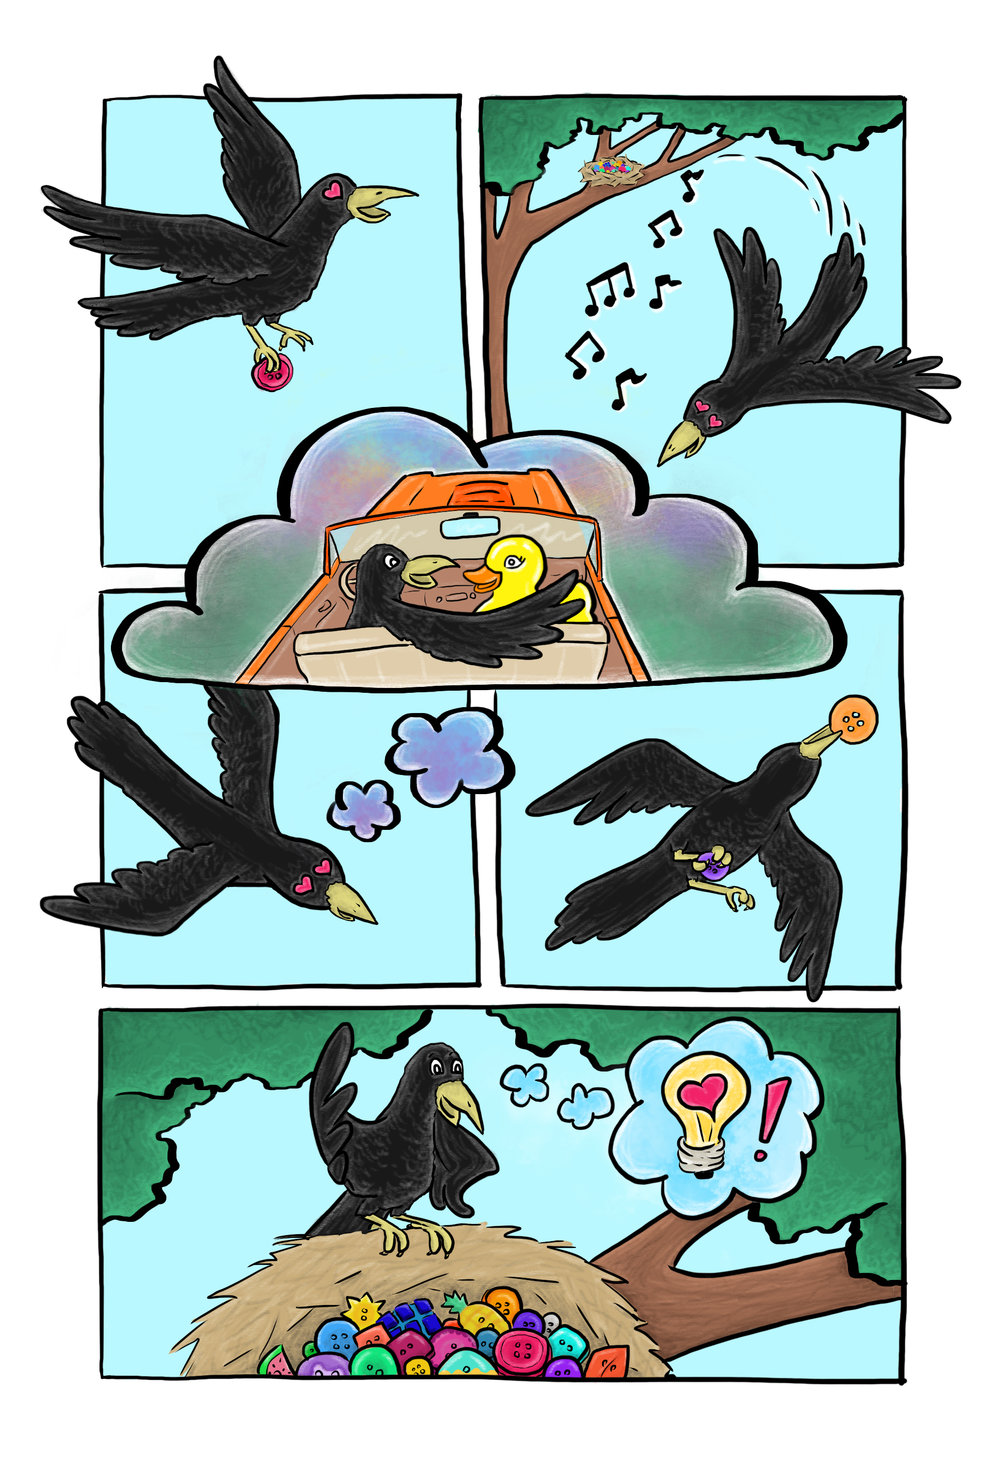 Page 3 Mr. Buttons flies back to his nest and gets an idea